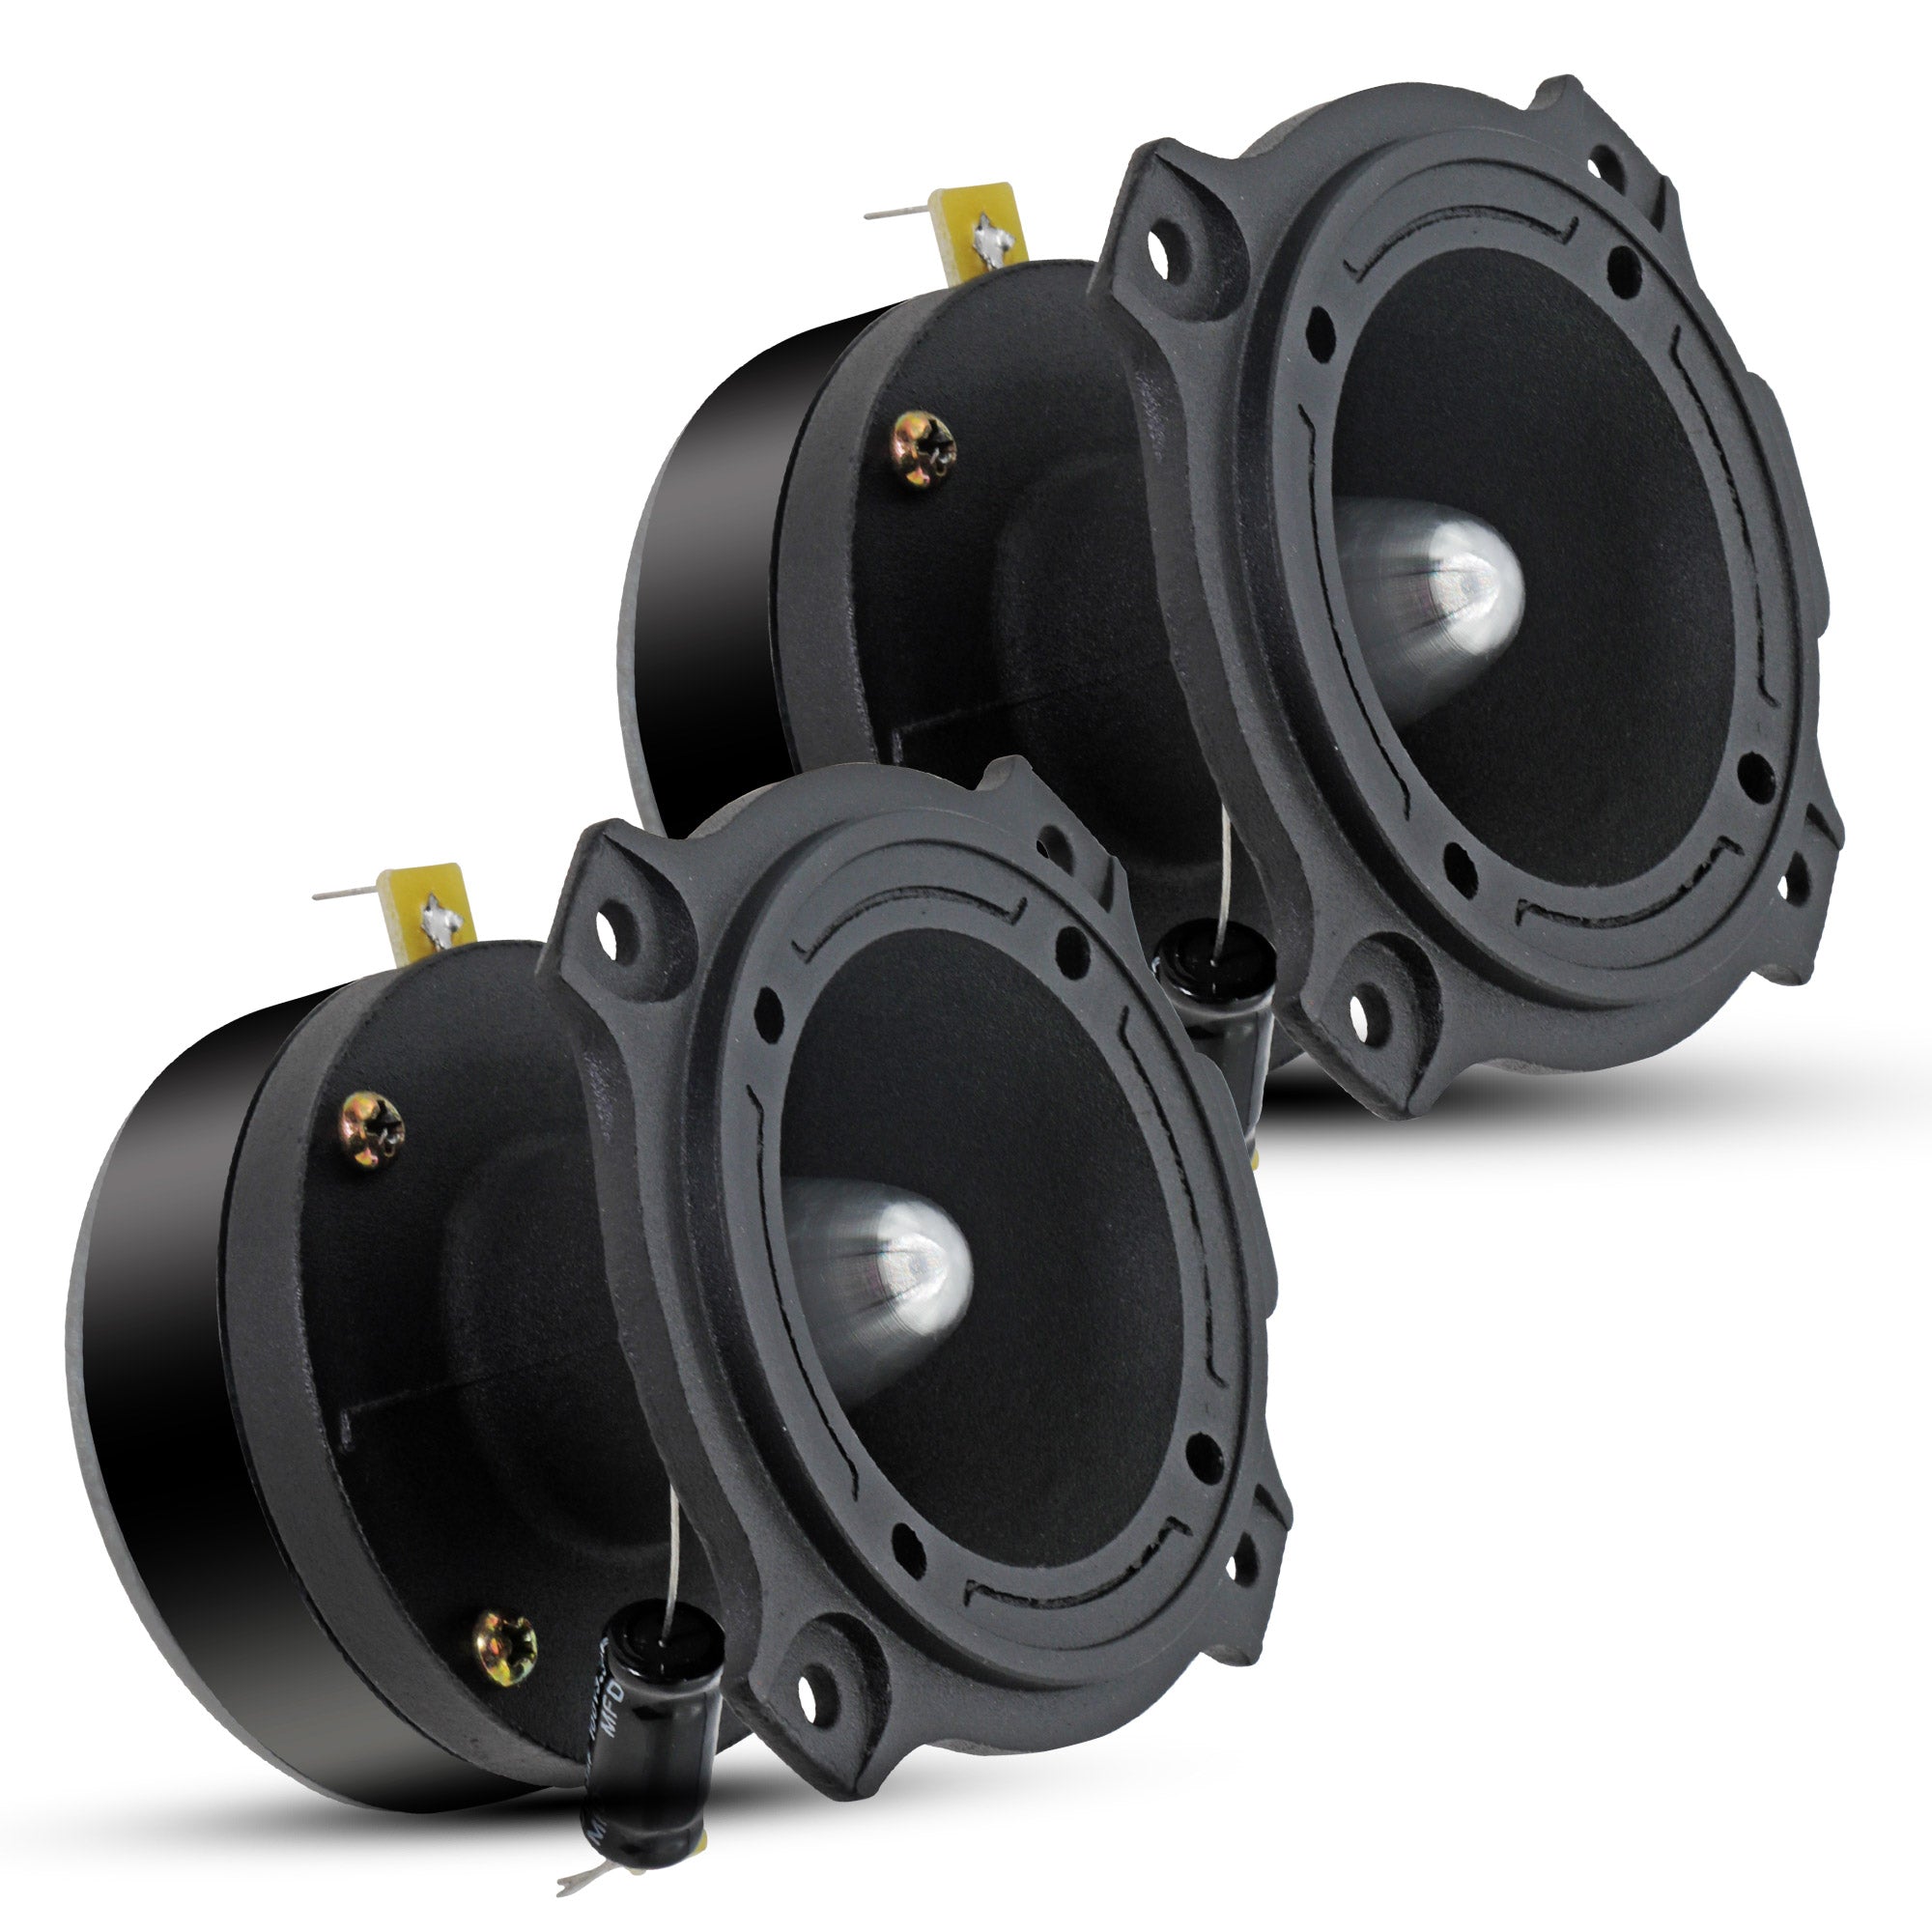 5Core 3.5 Inch Super Tweeter Pair Set 60W Combined RMS 4 OHM Super Tweeter for Car Audio